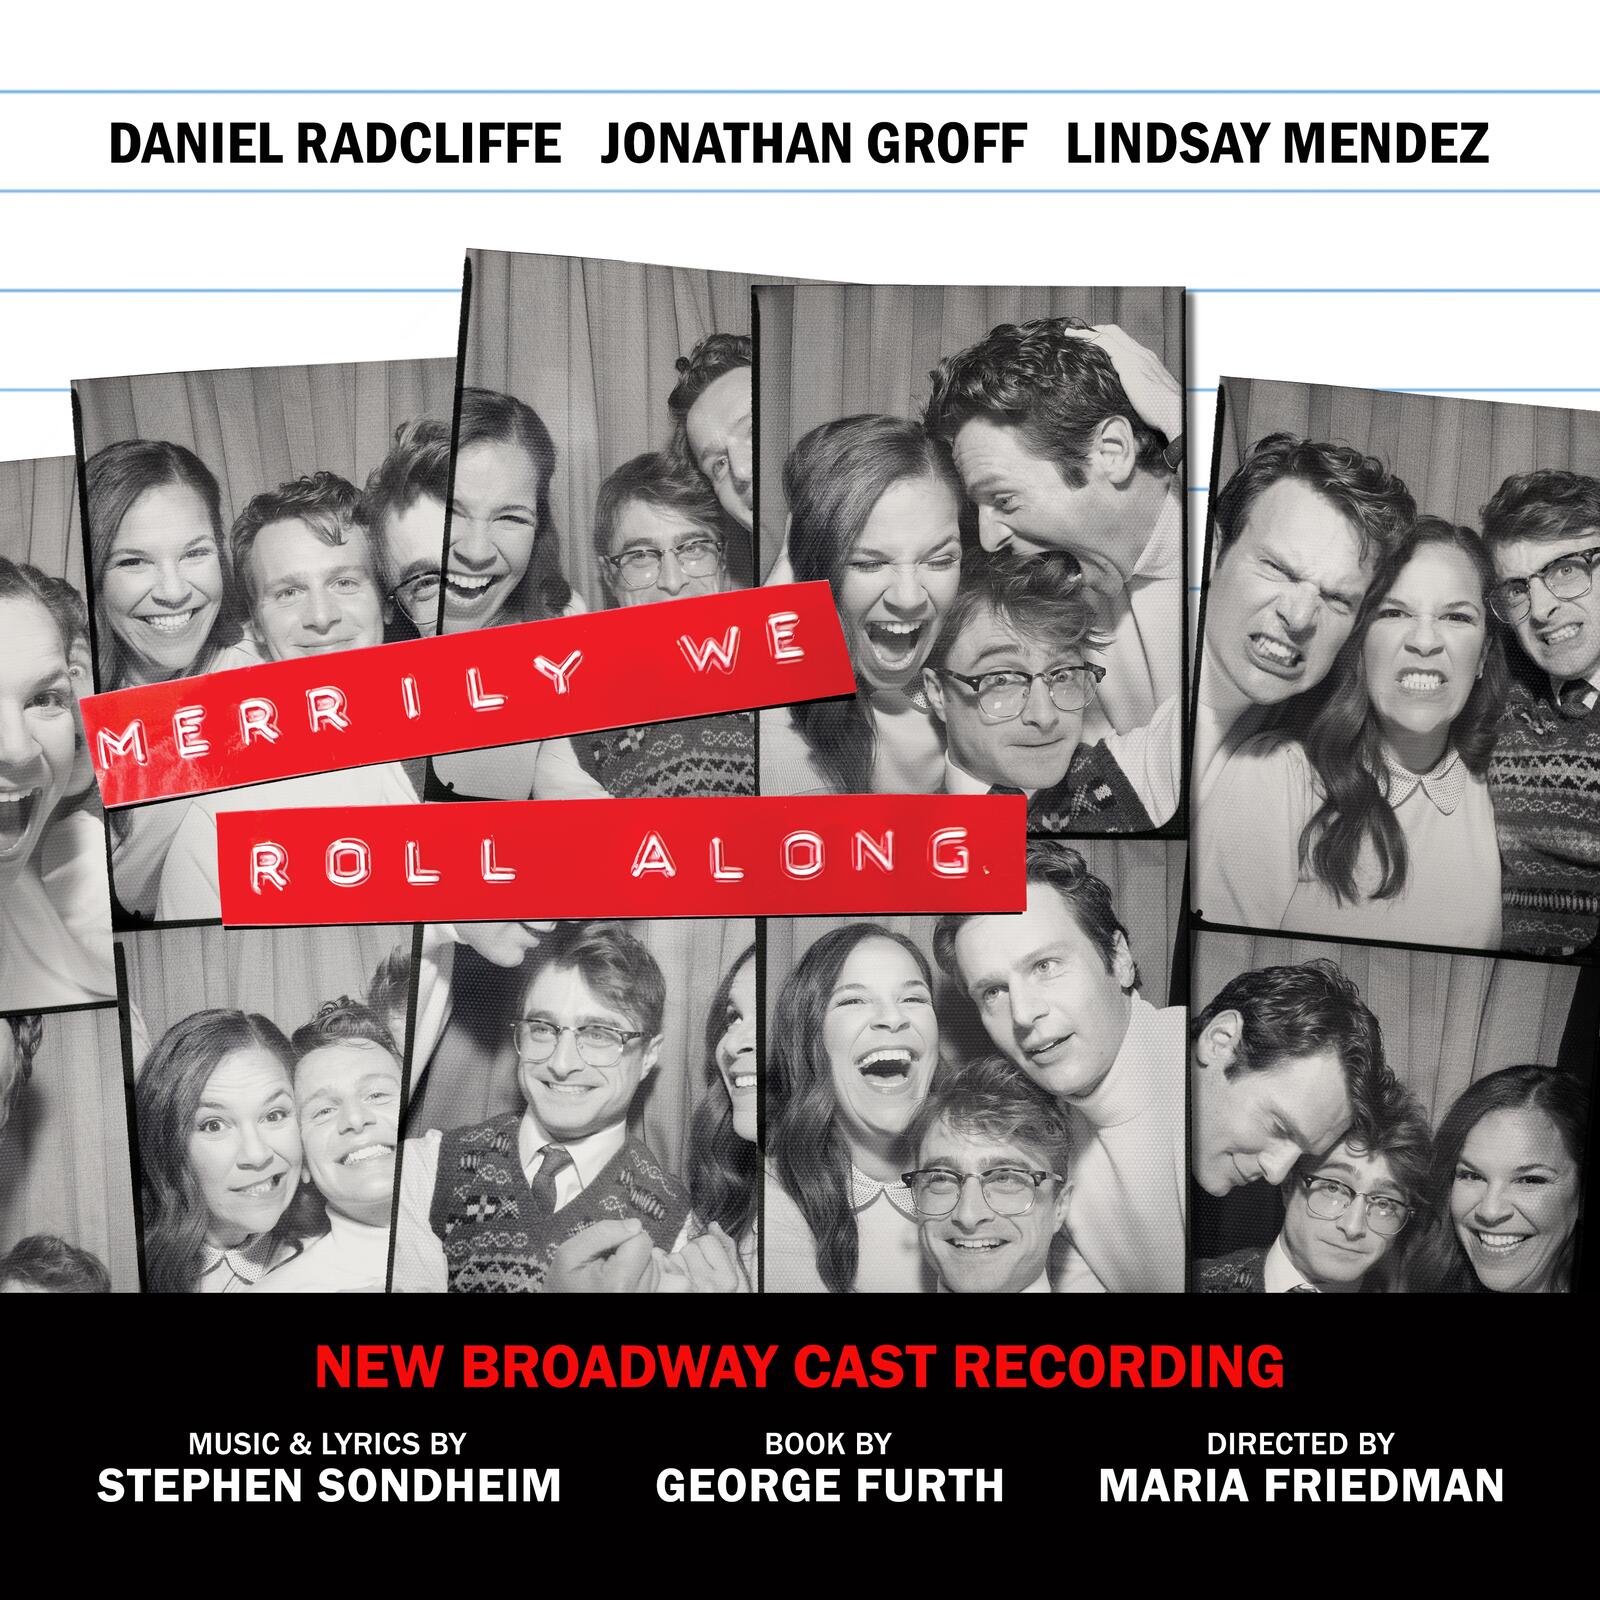 MERRILY 2023 Broadway Revival Cast Recording dropping 11/15 at midnight!